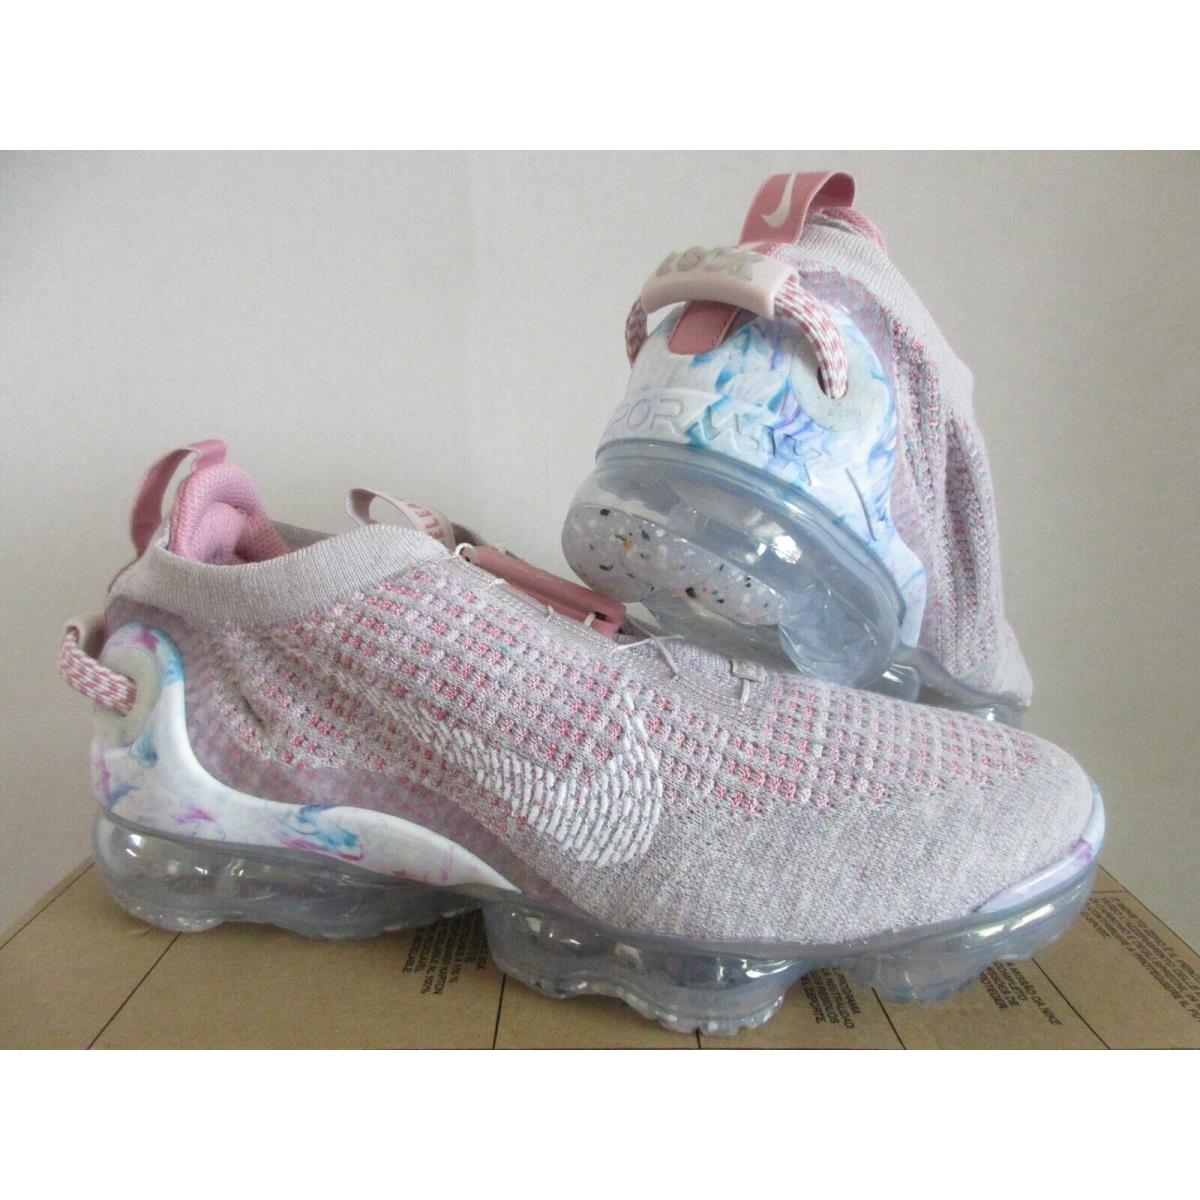 Nike shoes Air Vapormax Flyknit - Pink 0